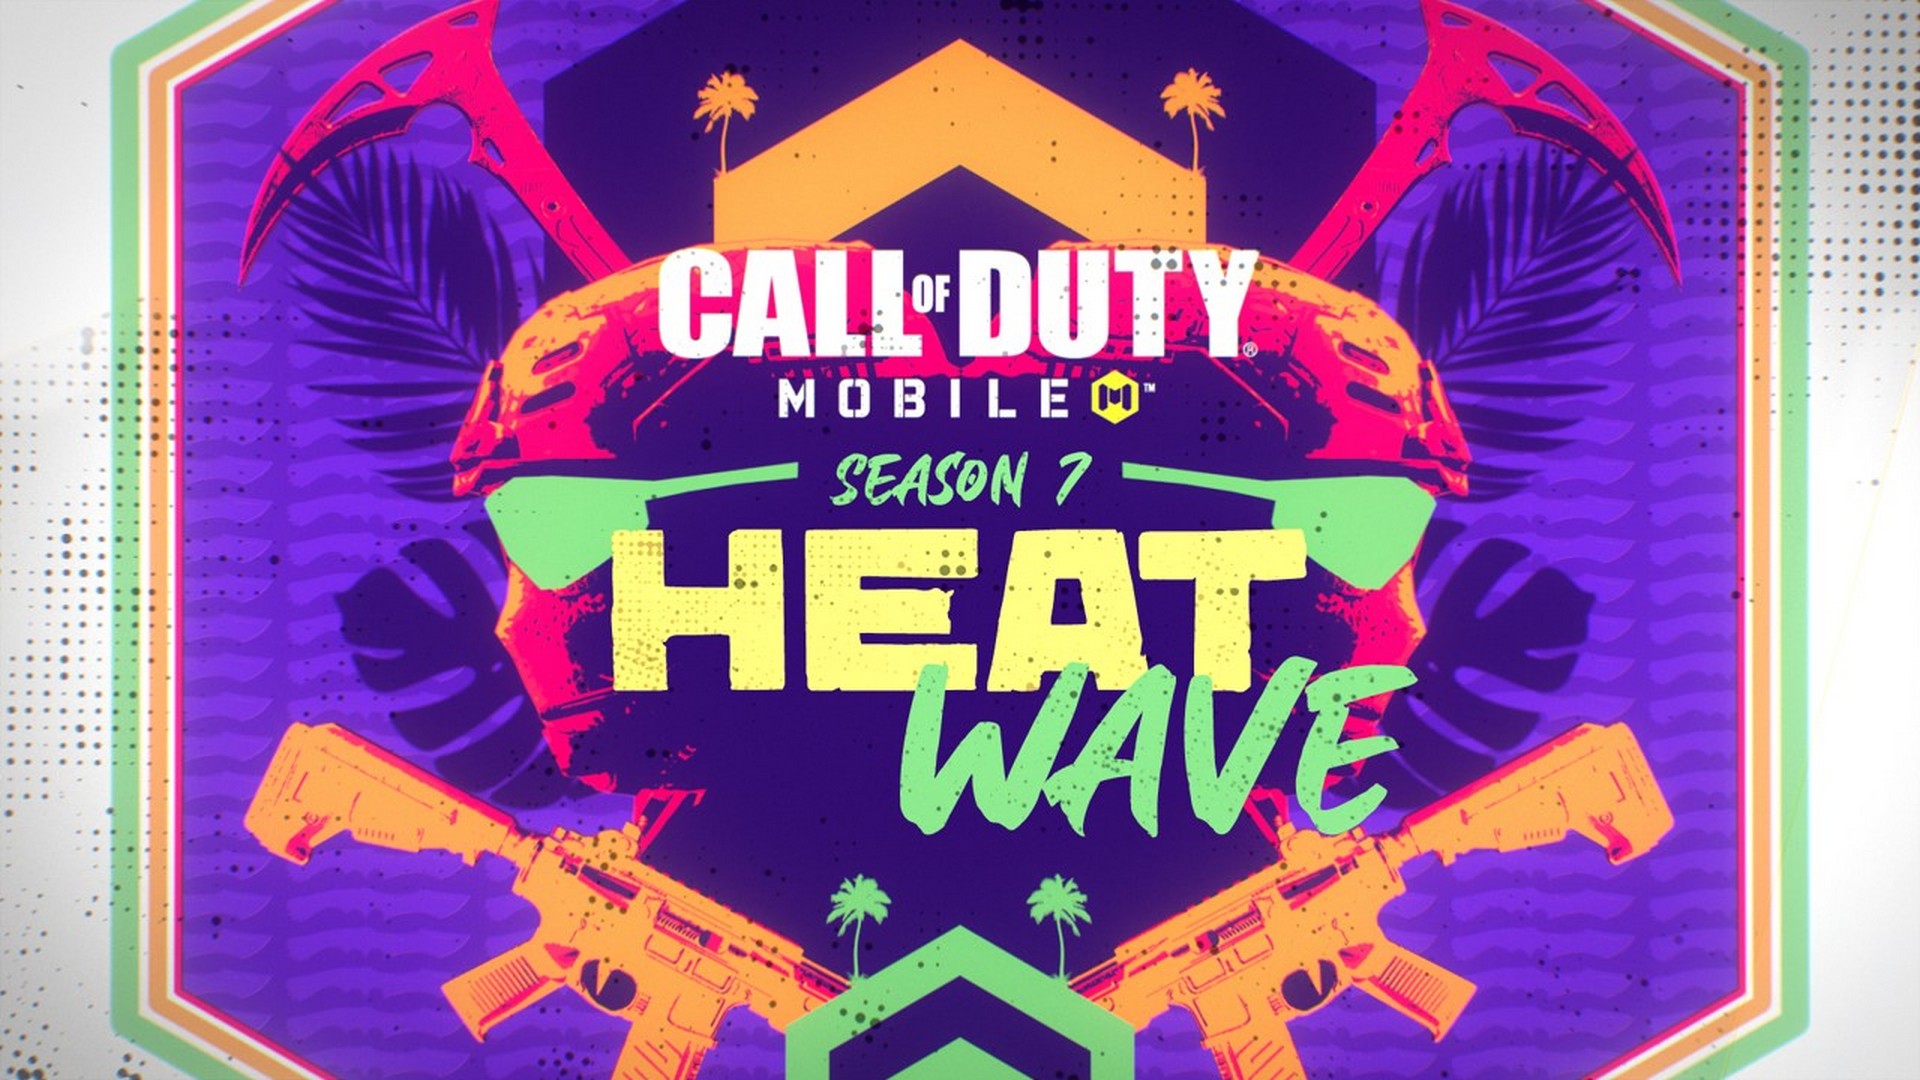 Call of Duty Mobile Season 4 'Spurned and Burned' adds new Wild West theme